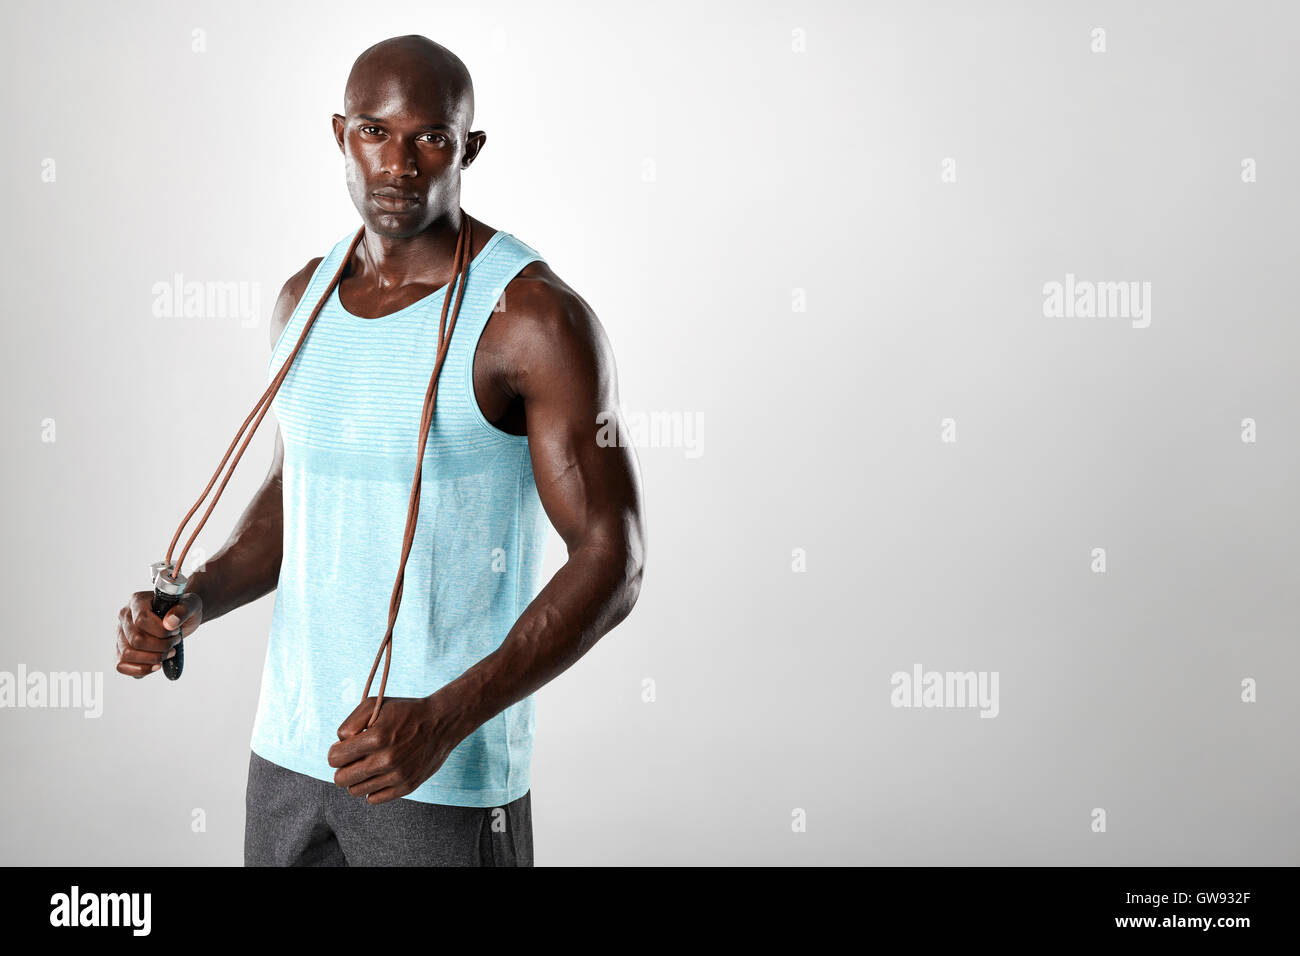 Fit and muscular man with jumping rope on grey background. African male model looking at camera with skipping rope. Stock Photo